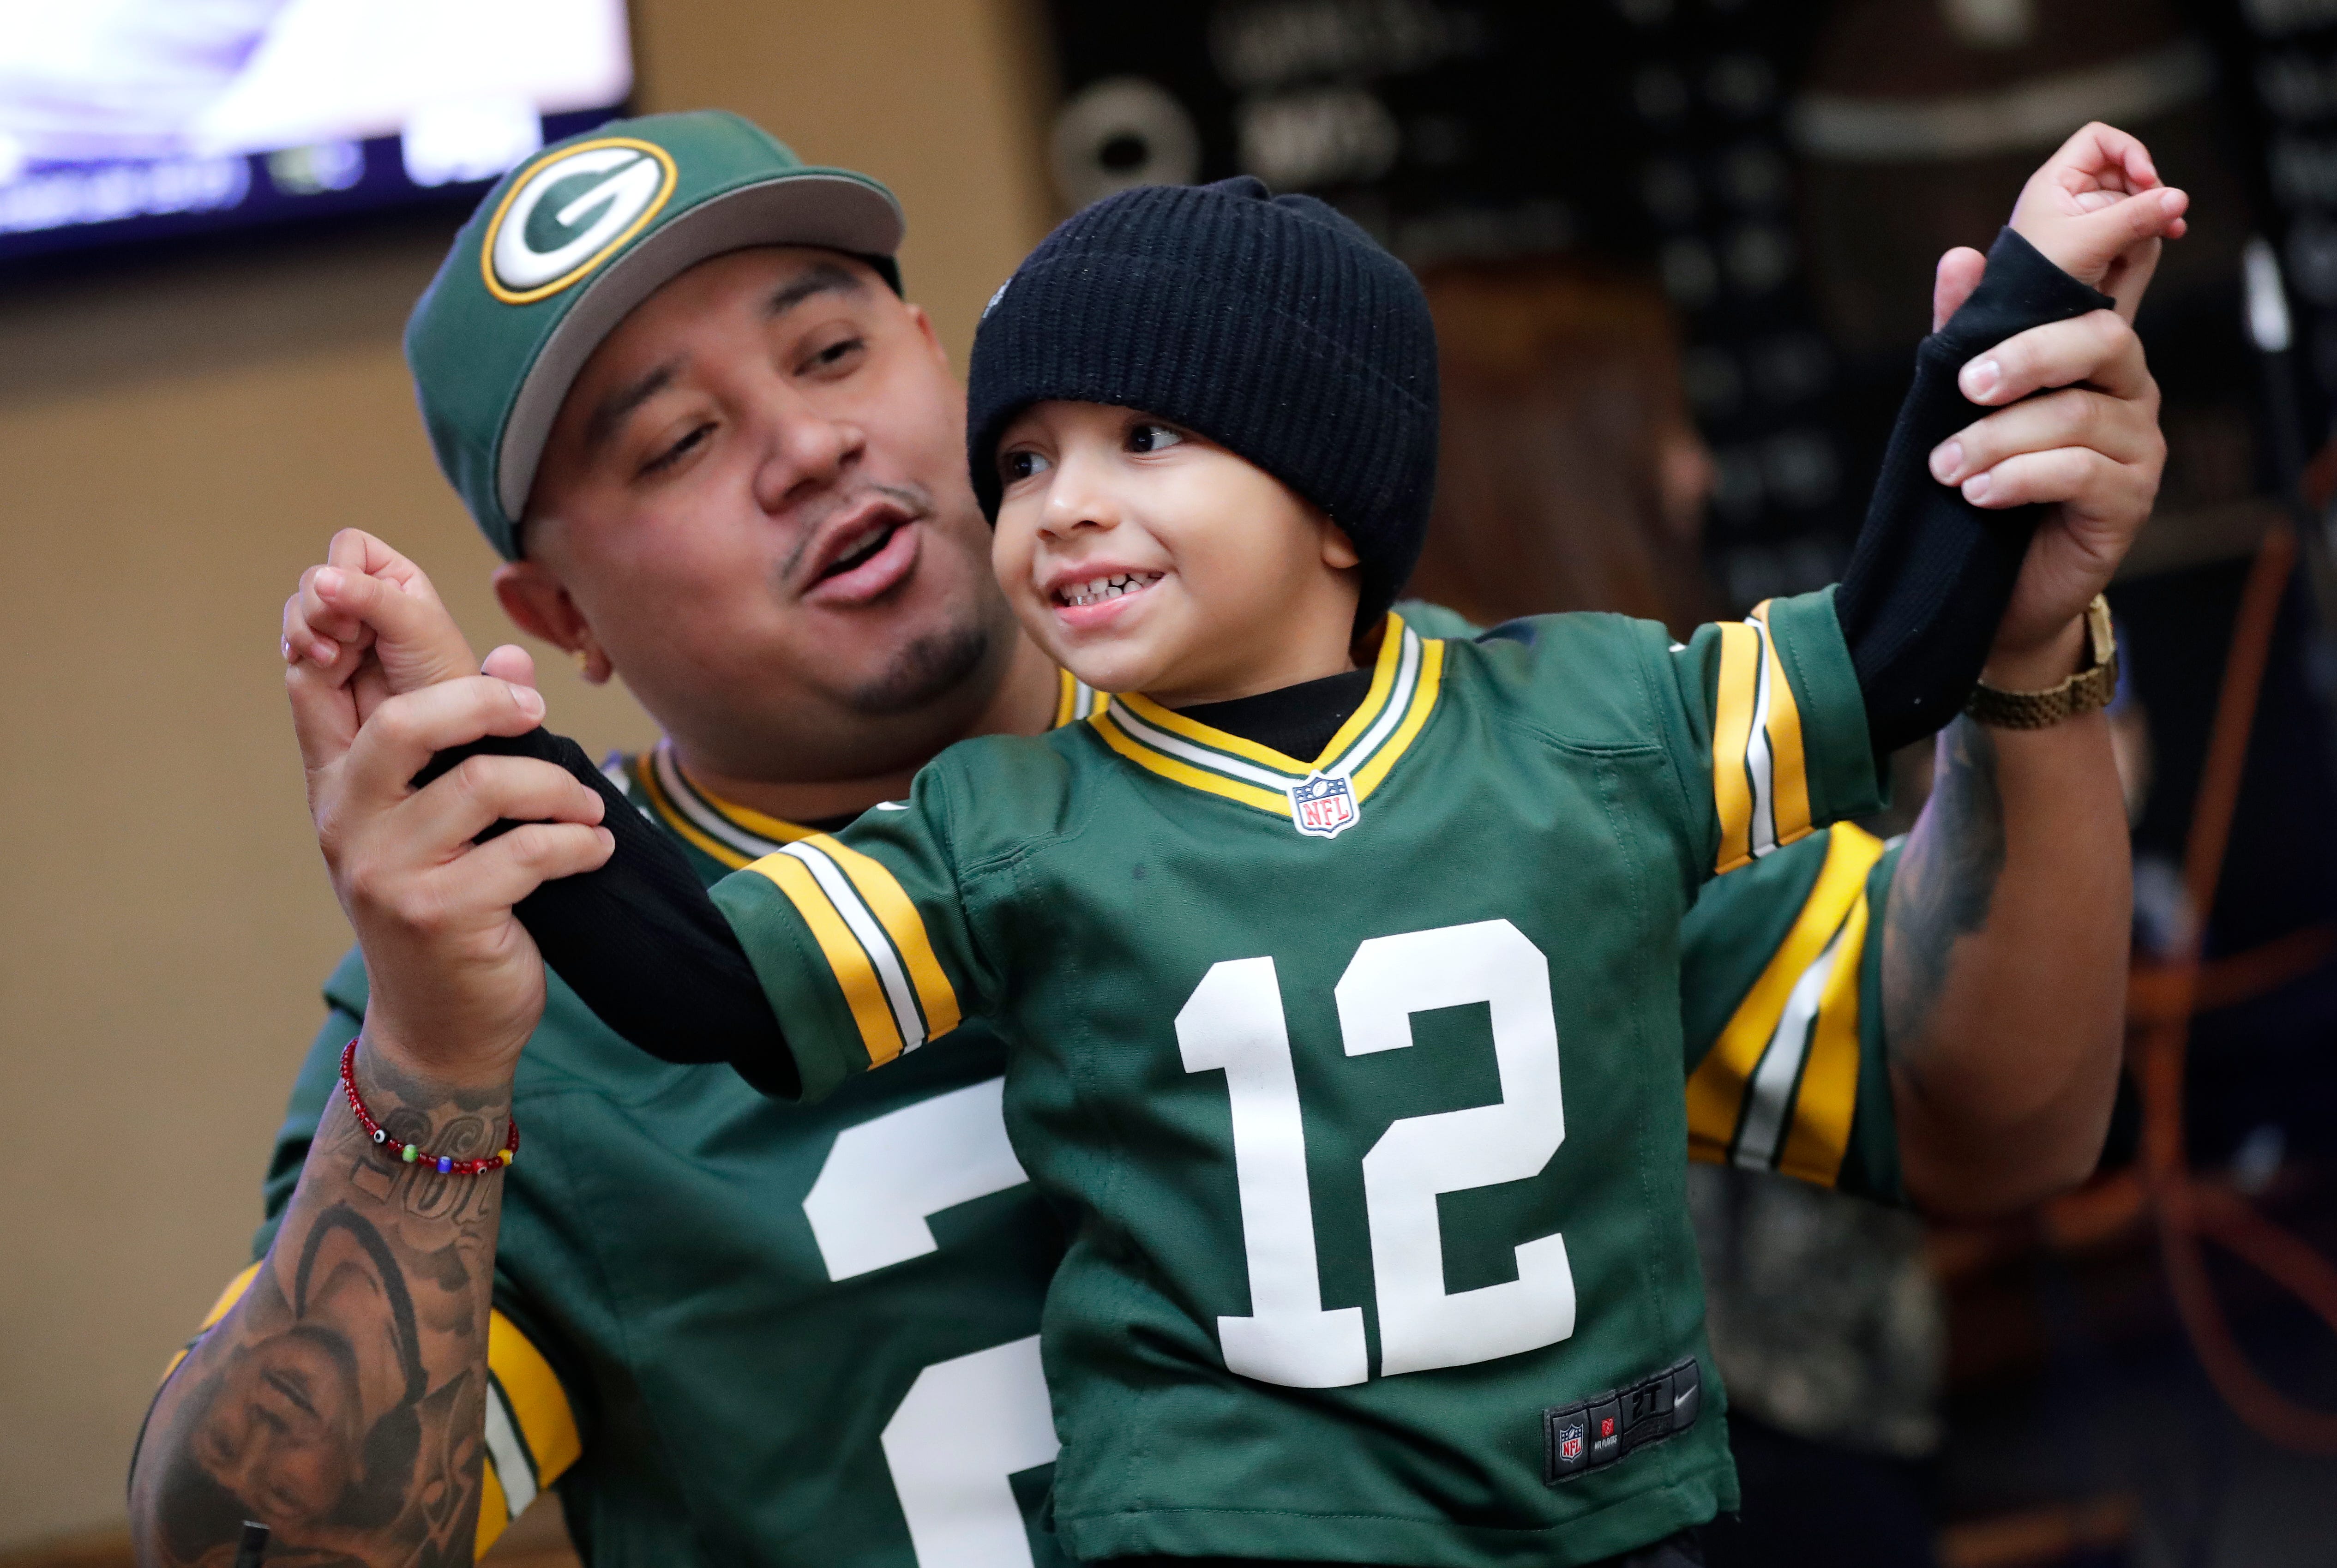 Green Bay Packers fan William Guifarro of Richmond, California dances with his son Ellijah King Guifarro, 3, during the Packers Everywhere pep rally Friday, January 19, 2024, at The Patio in Palo Alto, California.